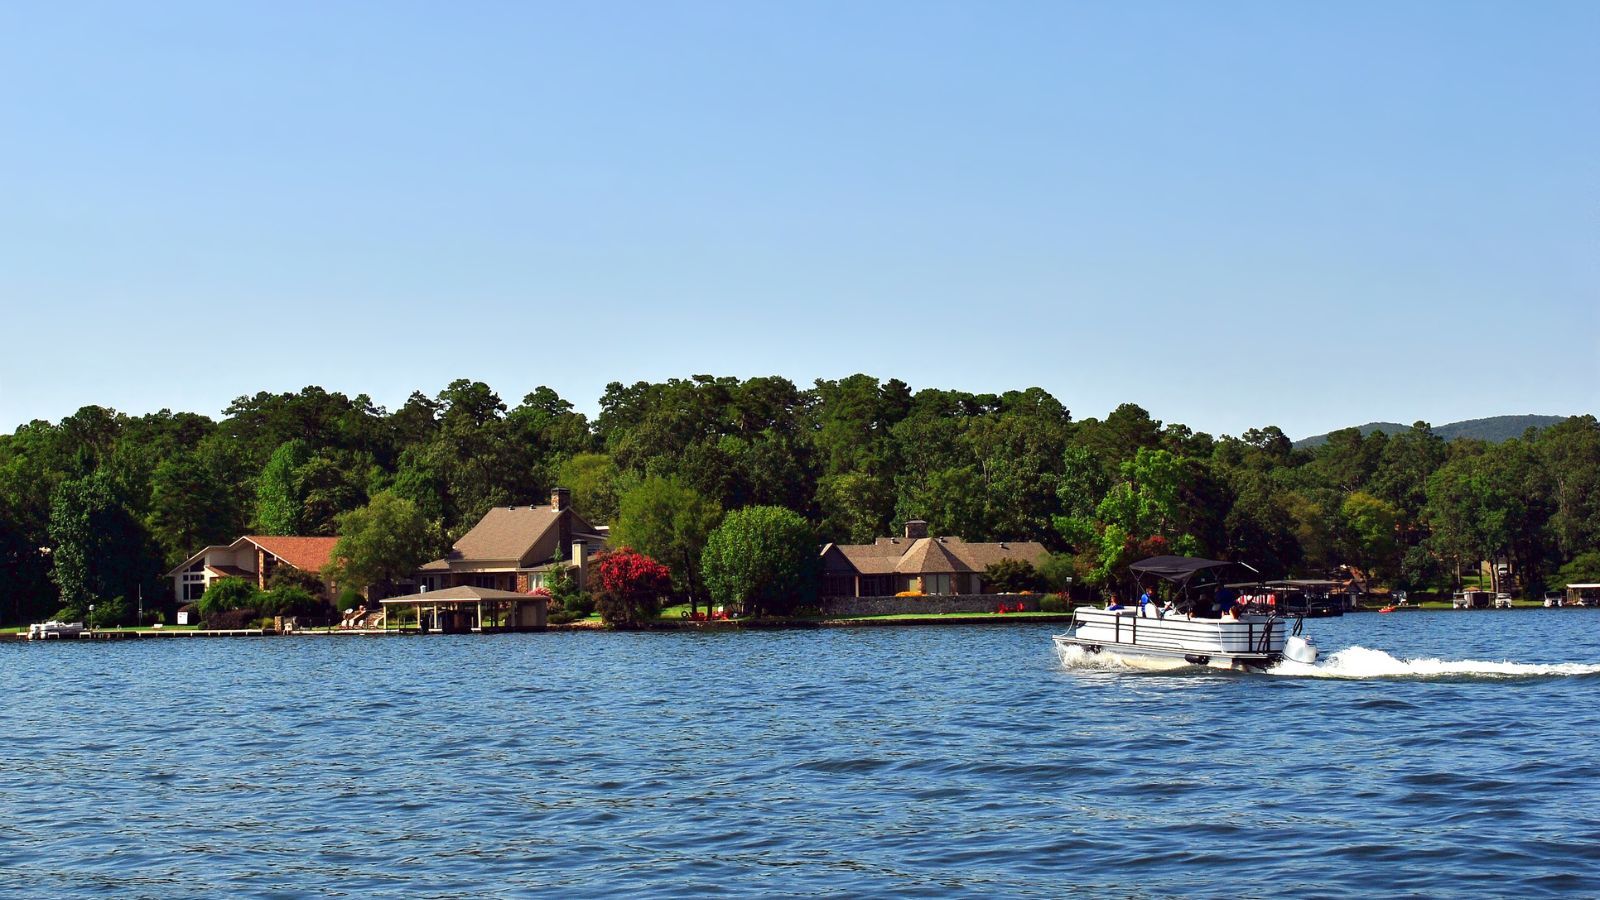 family boating near houses on a beautiful tennessee lake